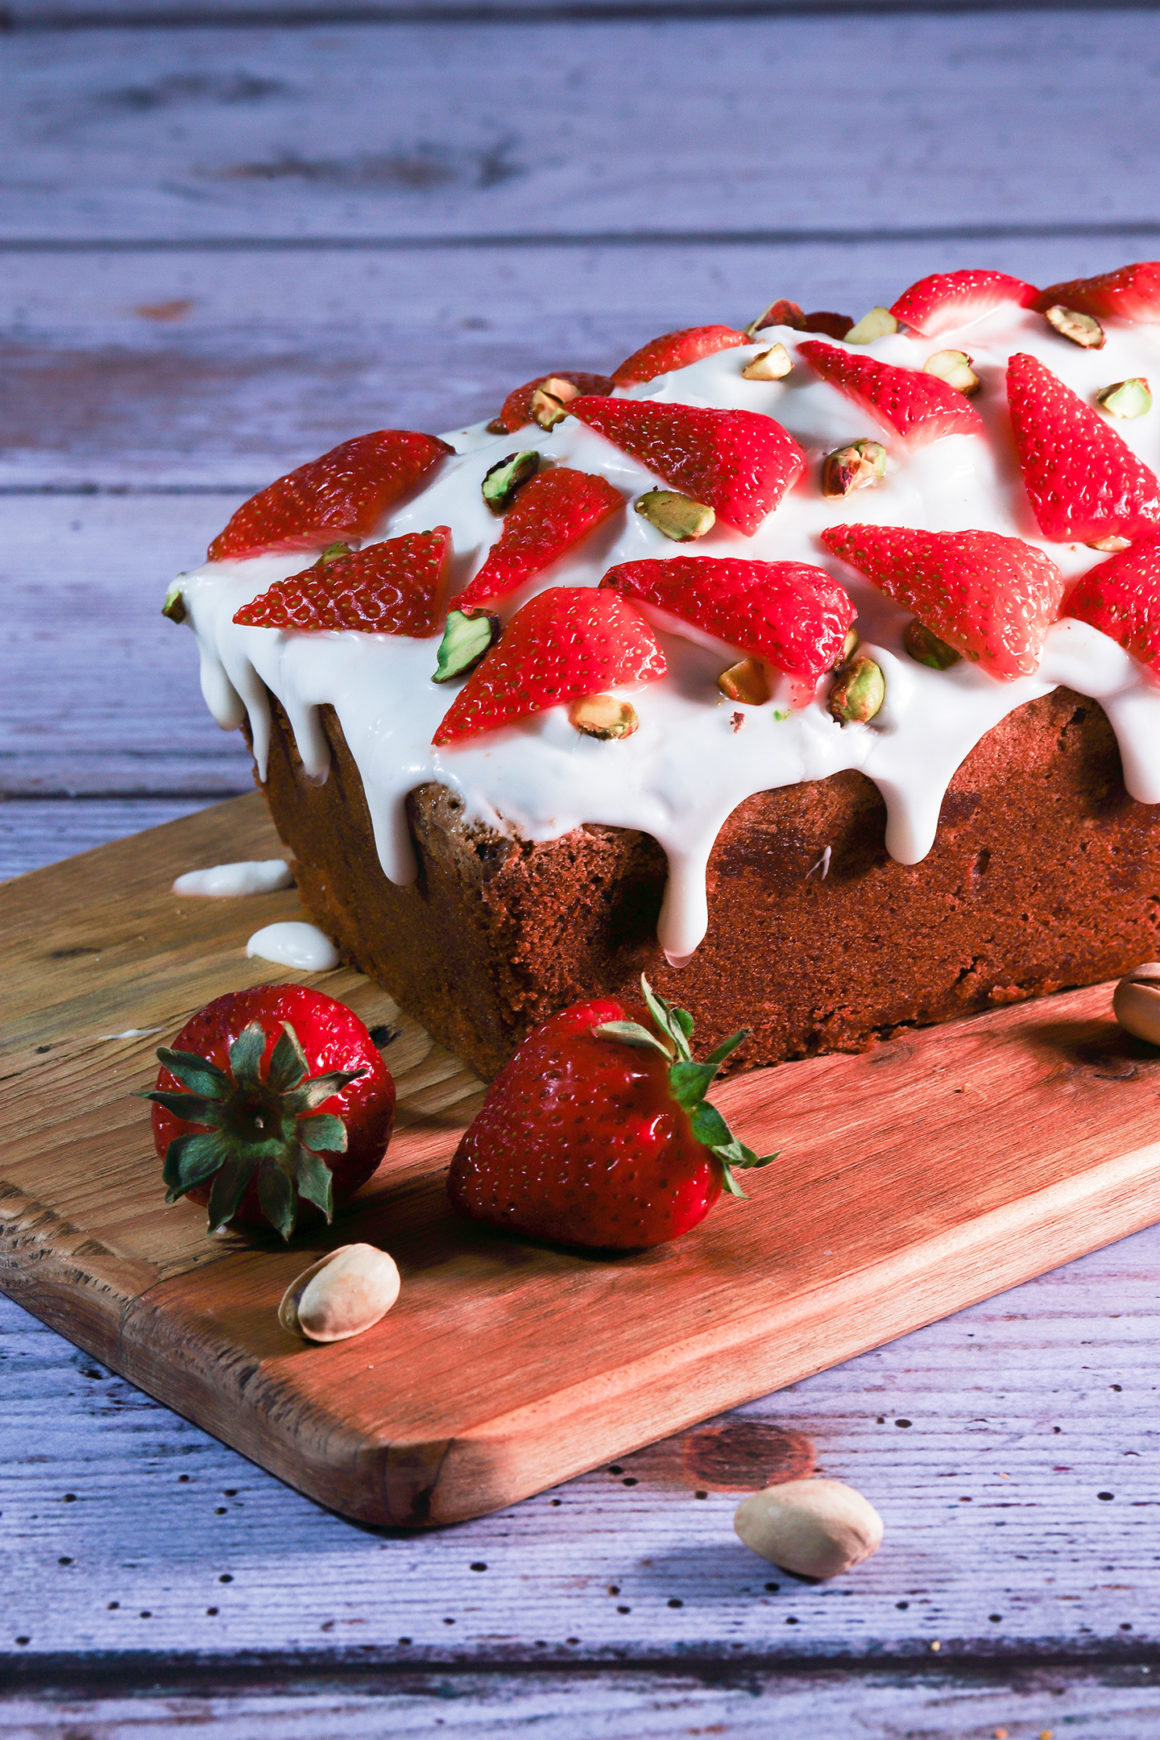 Pound Cake with Strawberries